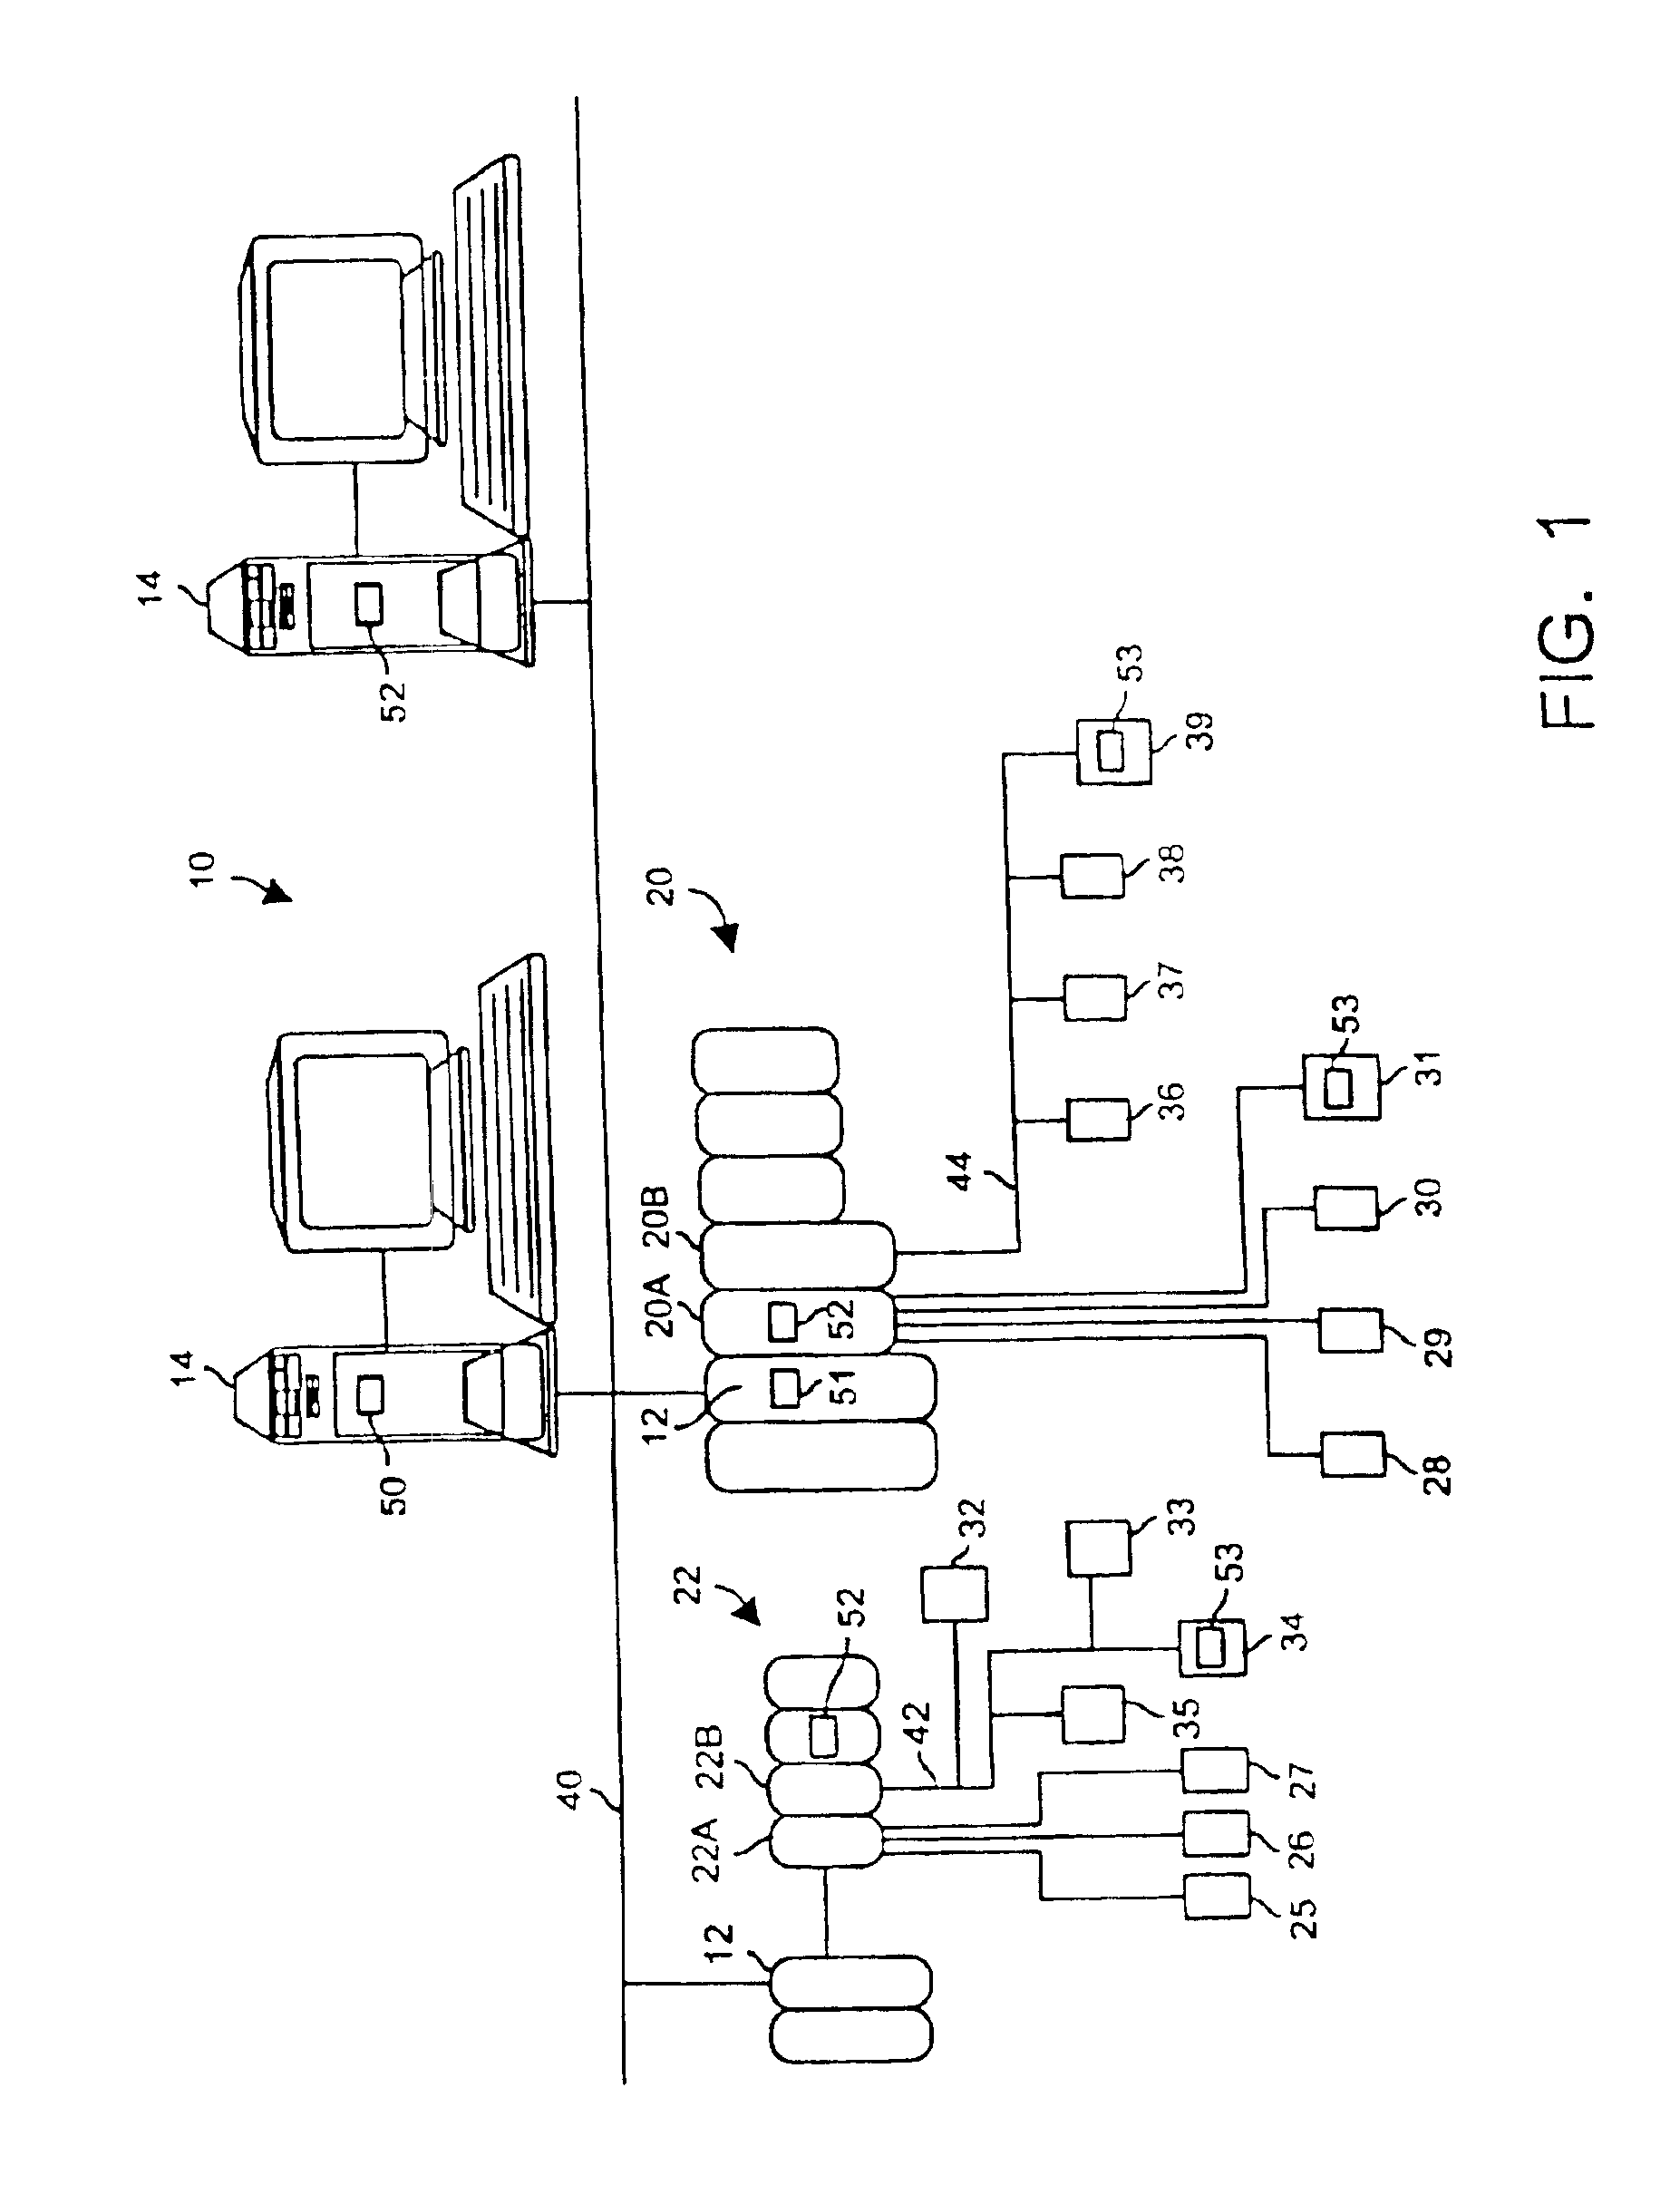 Enhanced hart device alerts in a process control system